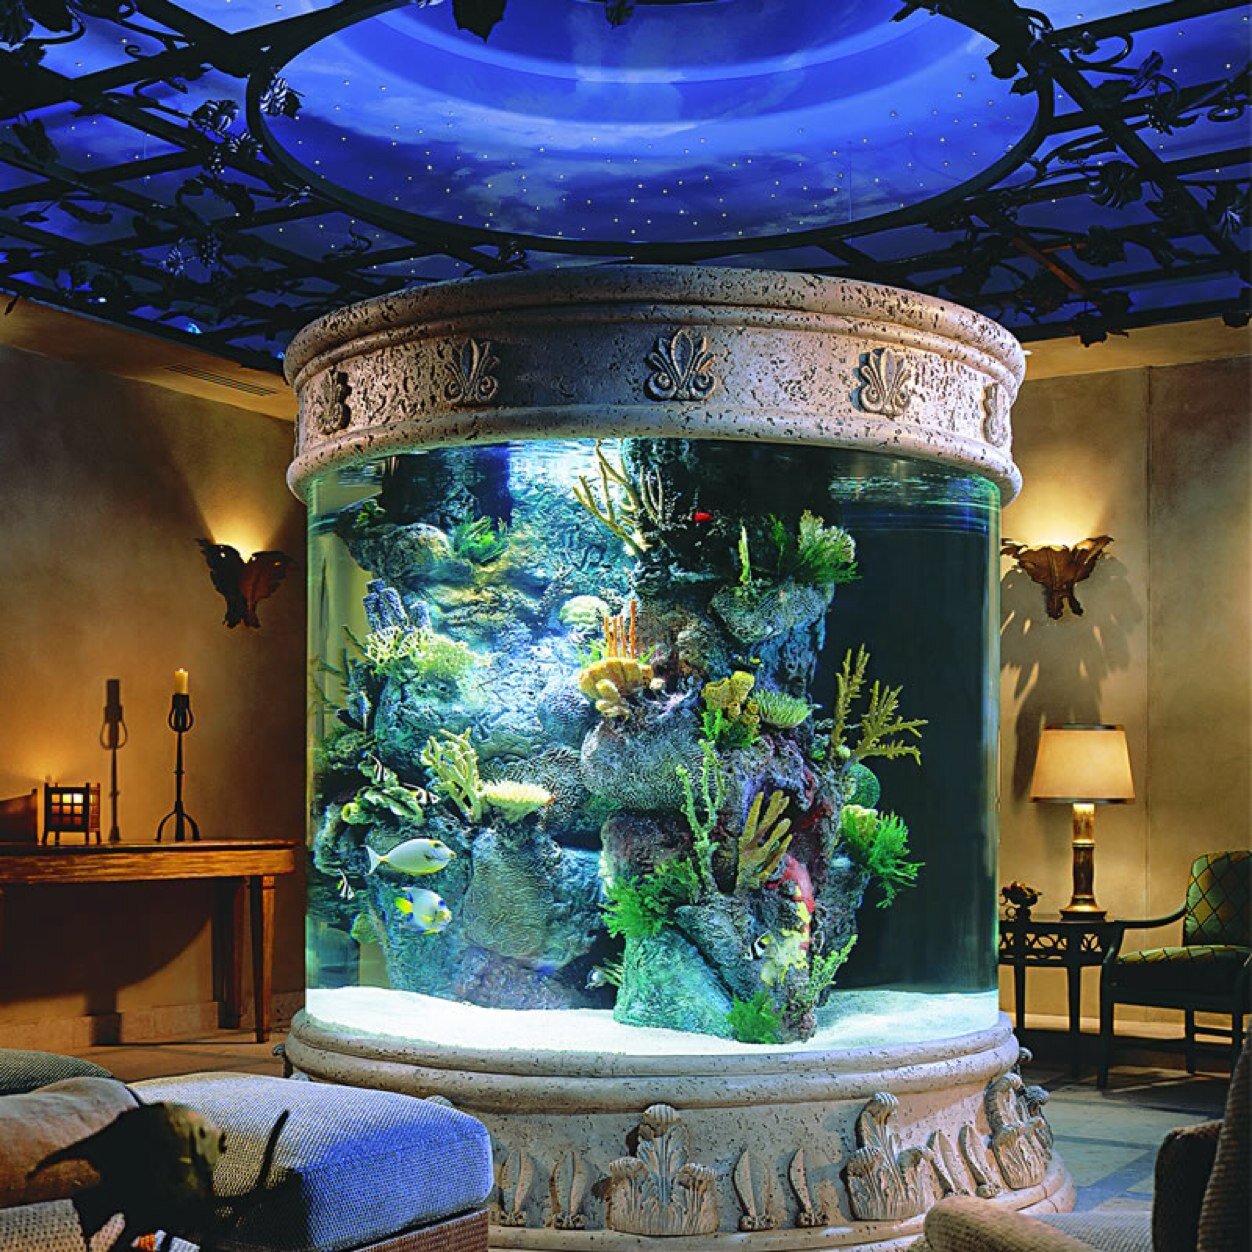 Pictures of aquariums you dont see everyday